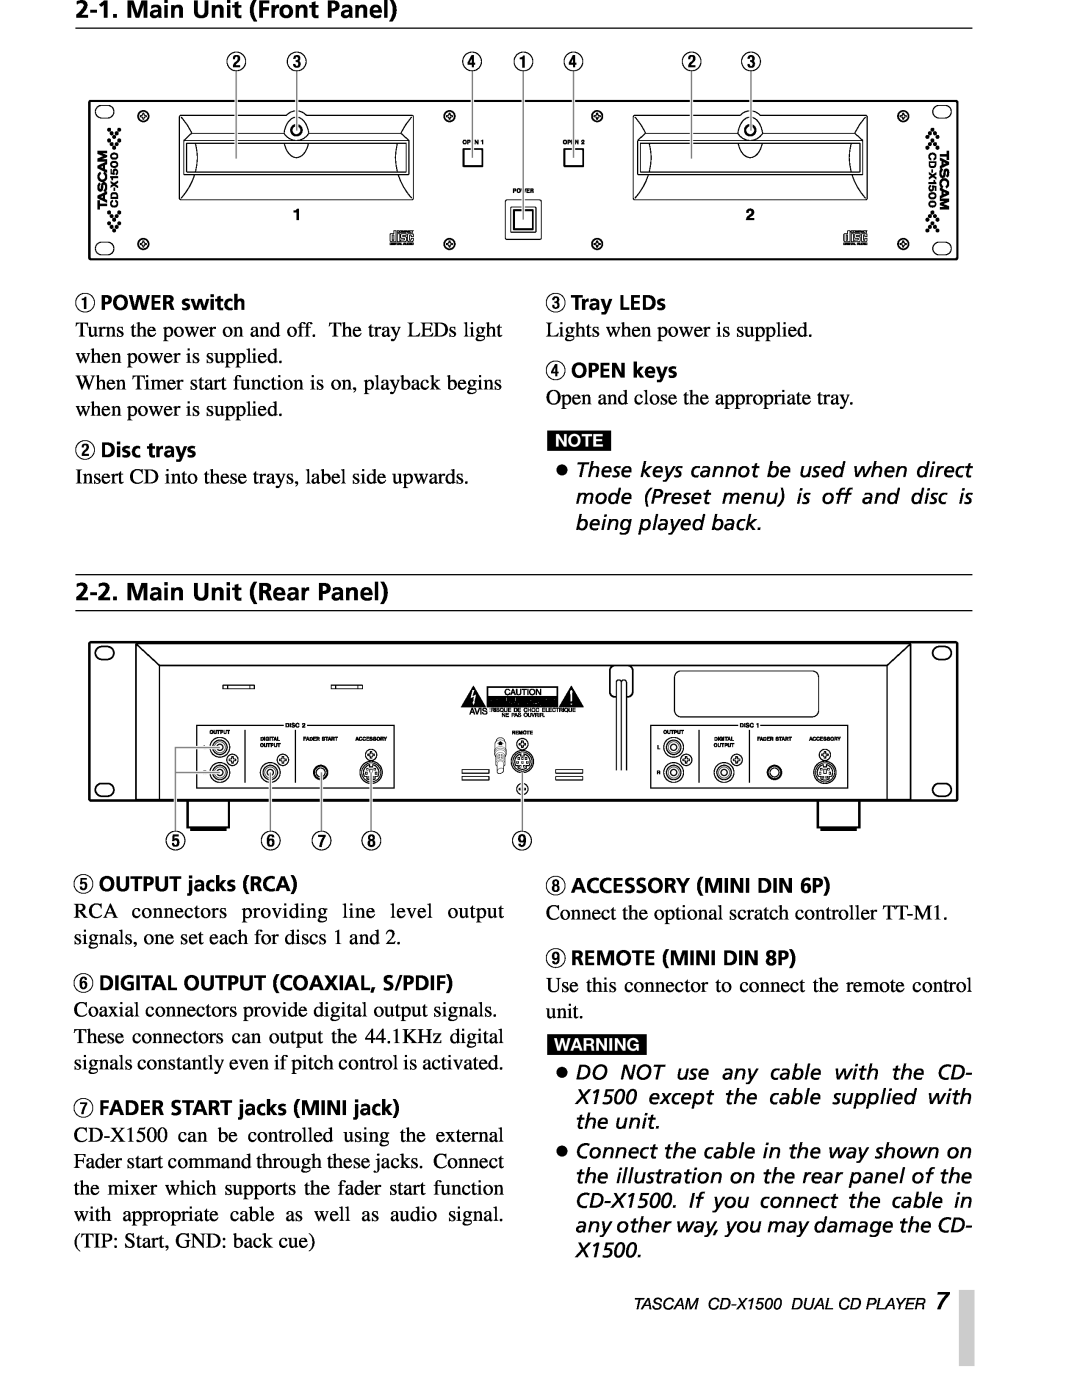 Sony CD-X1500 owner manual Main Unit Front Panel, Main Unit Rear Panel, 1POWER switch, 2Disc trays, 3Tray LEDs, 4OPEN keys 